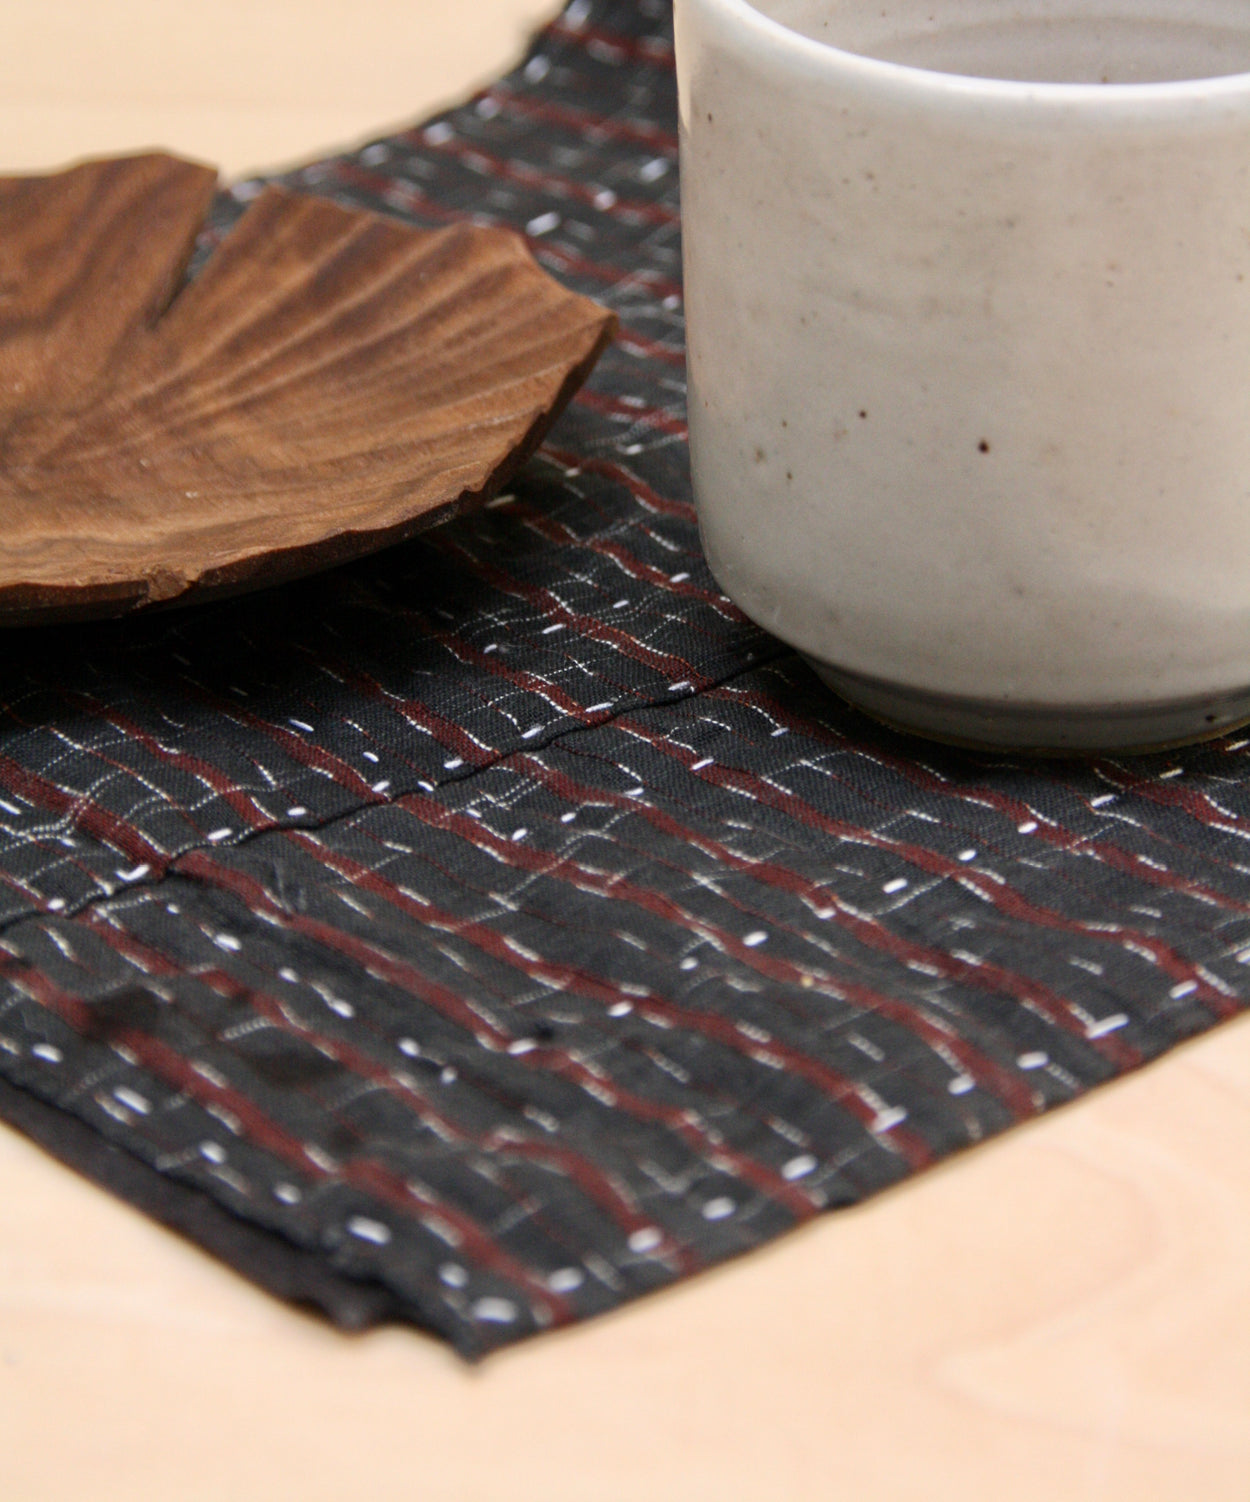 Vintage Japanese Indigo Placemat with handmade ceramic cup and wood plate.